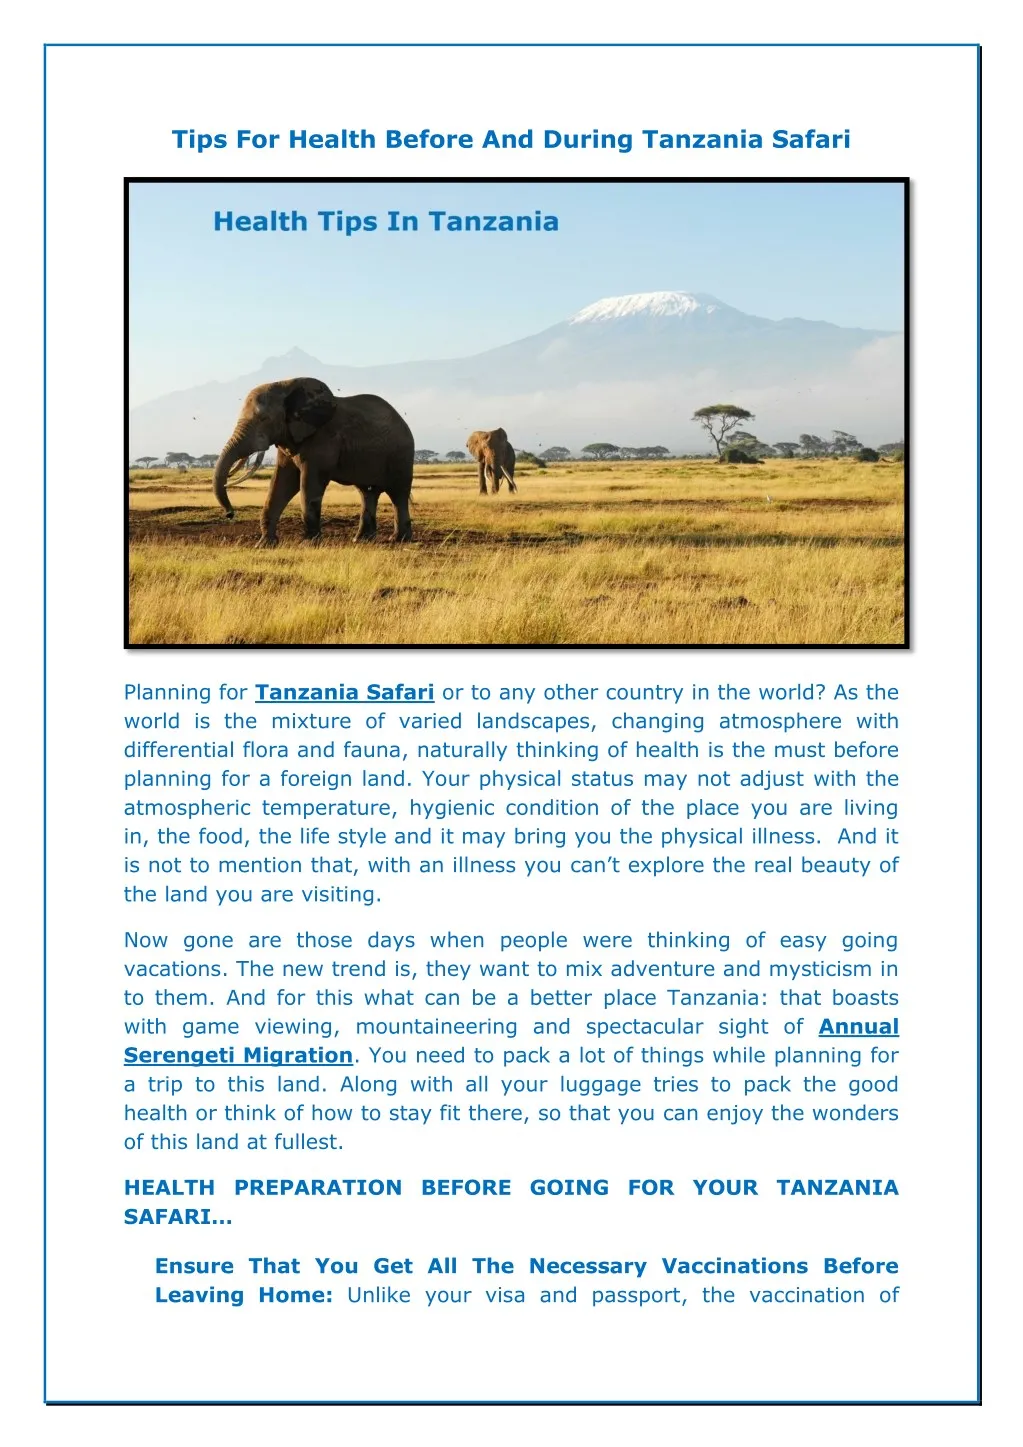 tips for health before and during tanzania safari